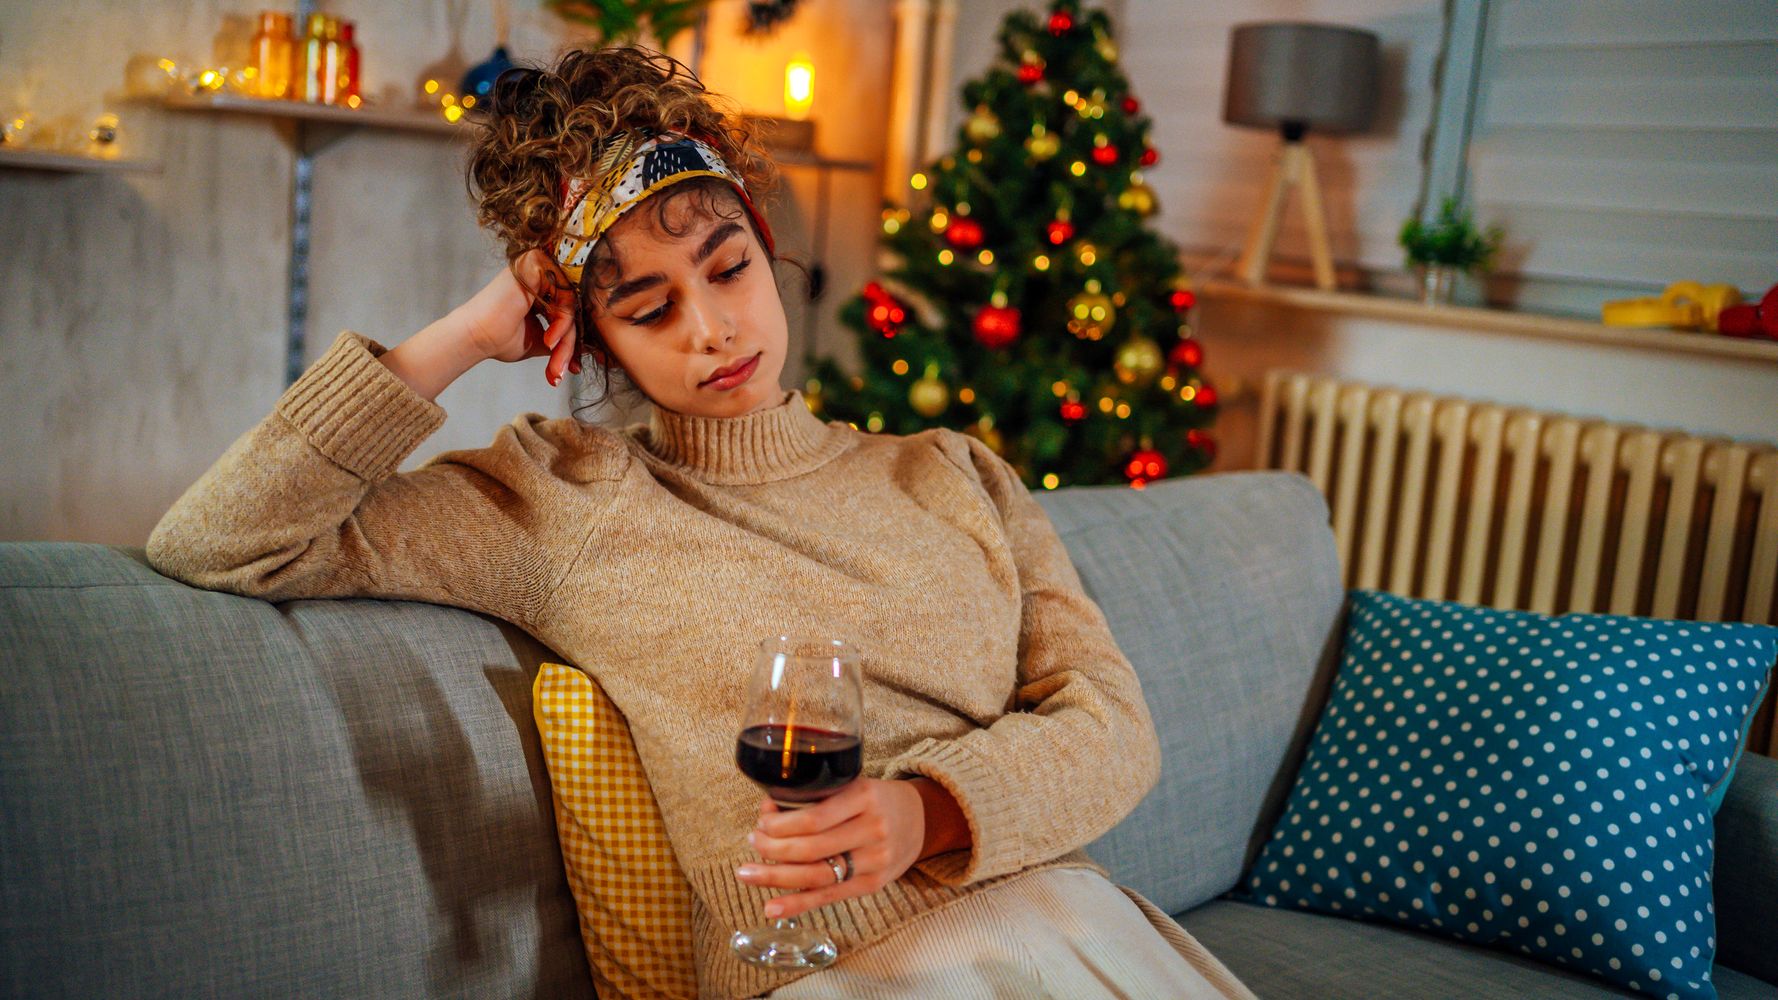 10 Realistic Ways To Set Boundaries With Others During The Holidays